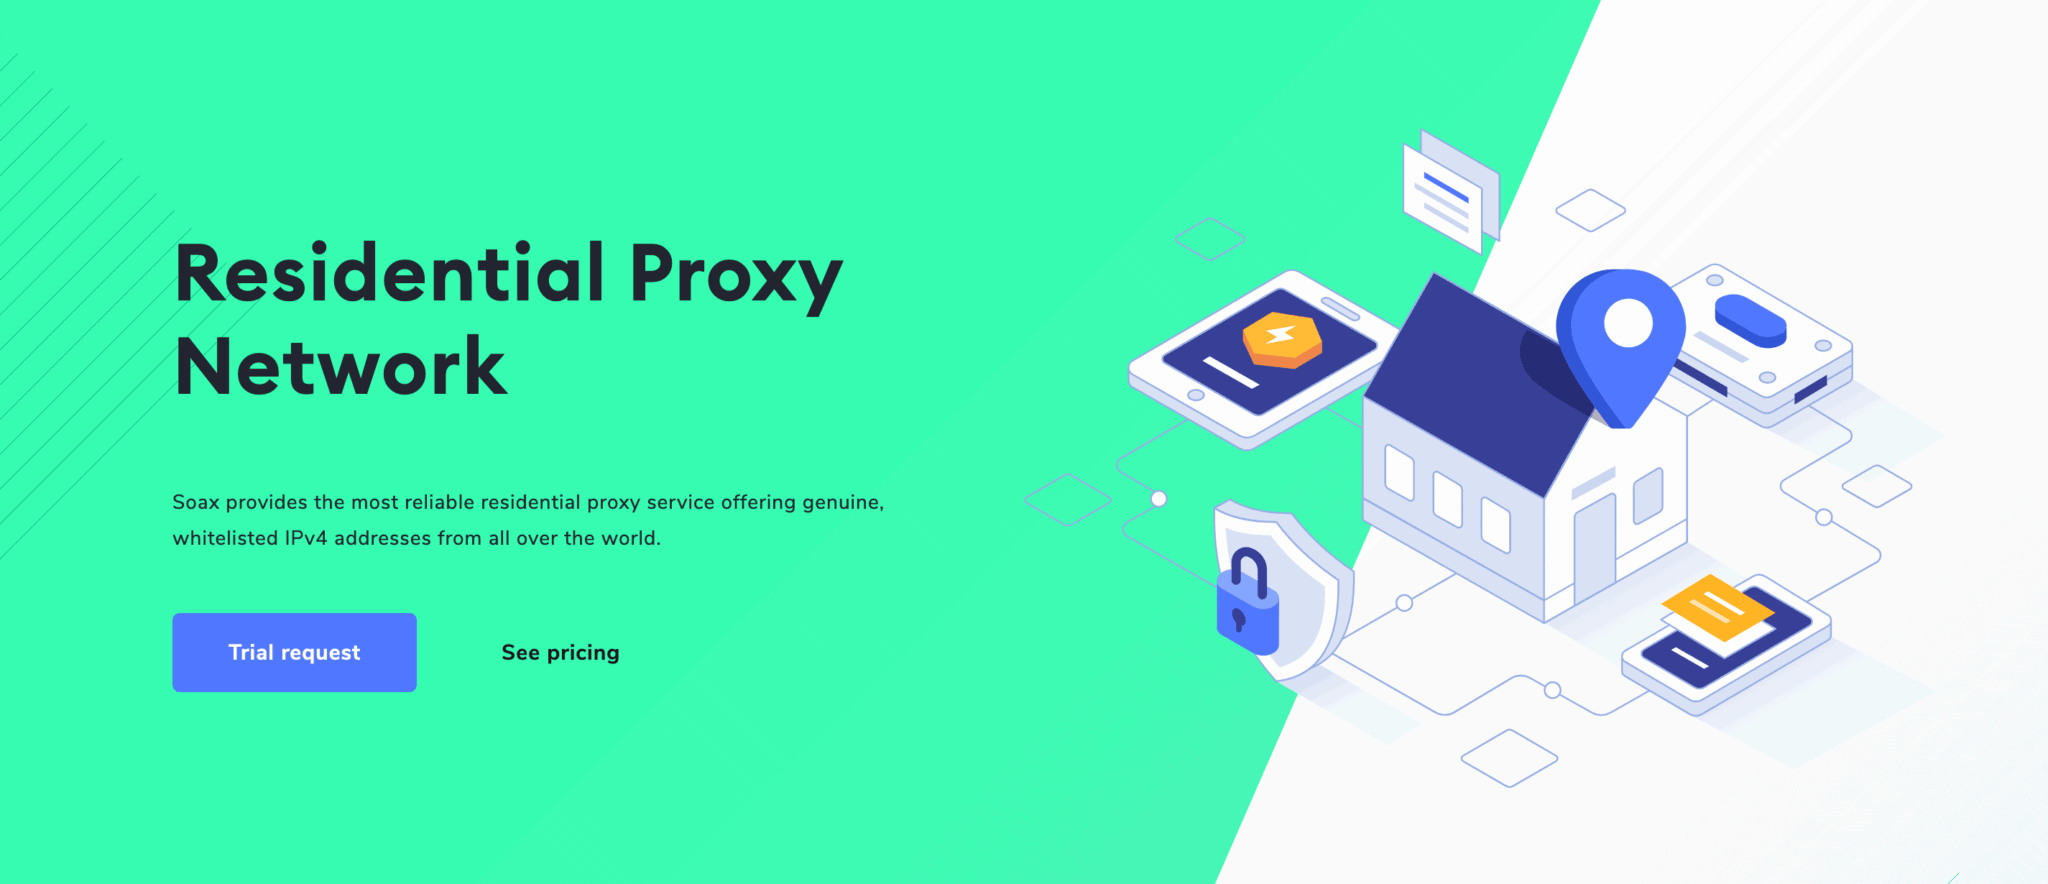 Residential proxy